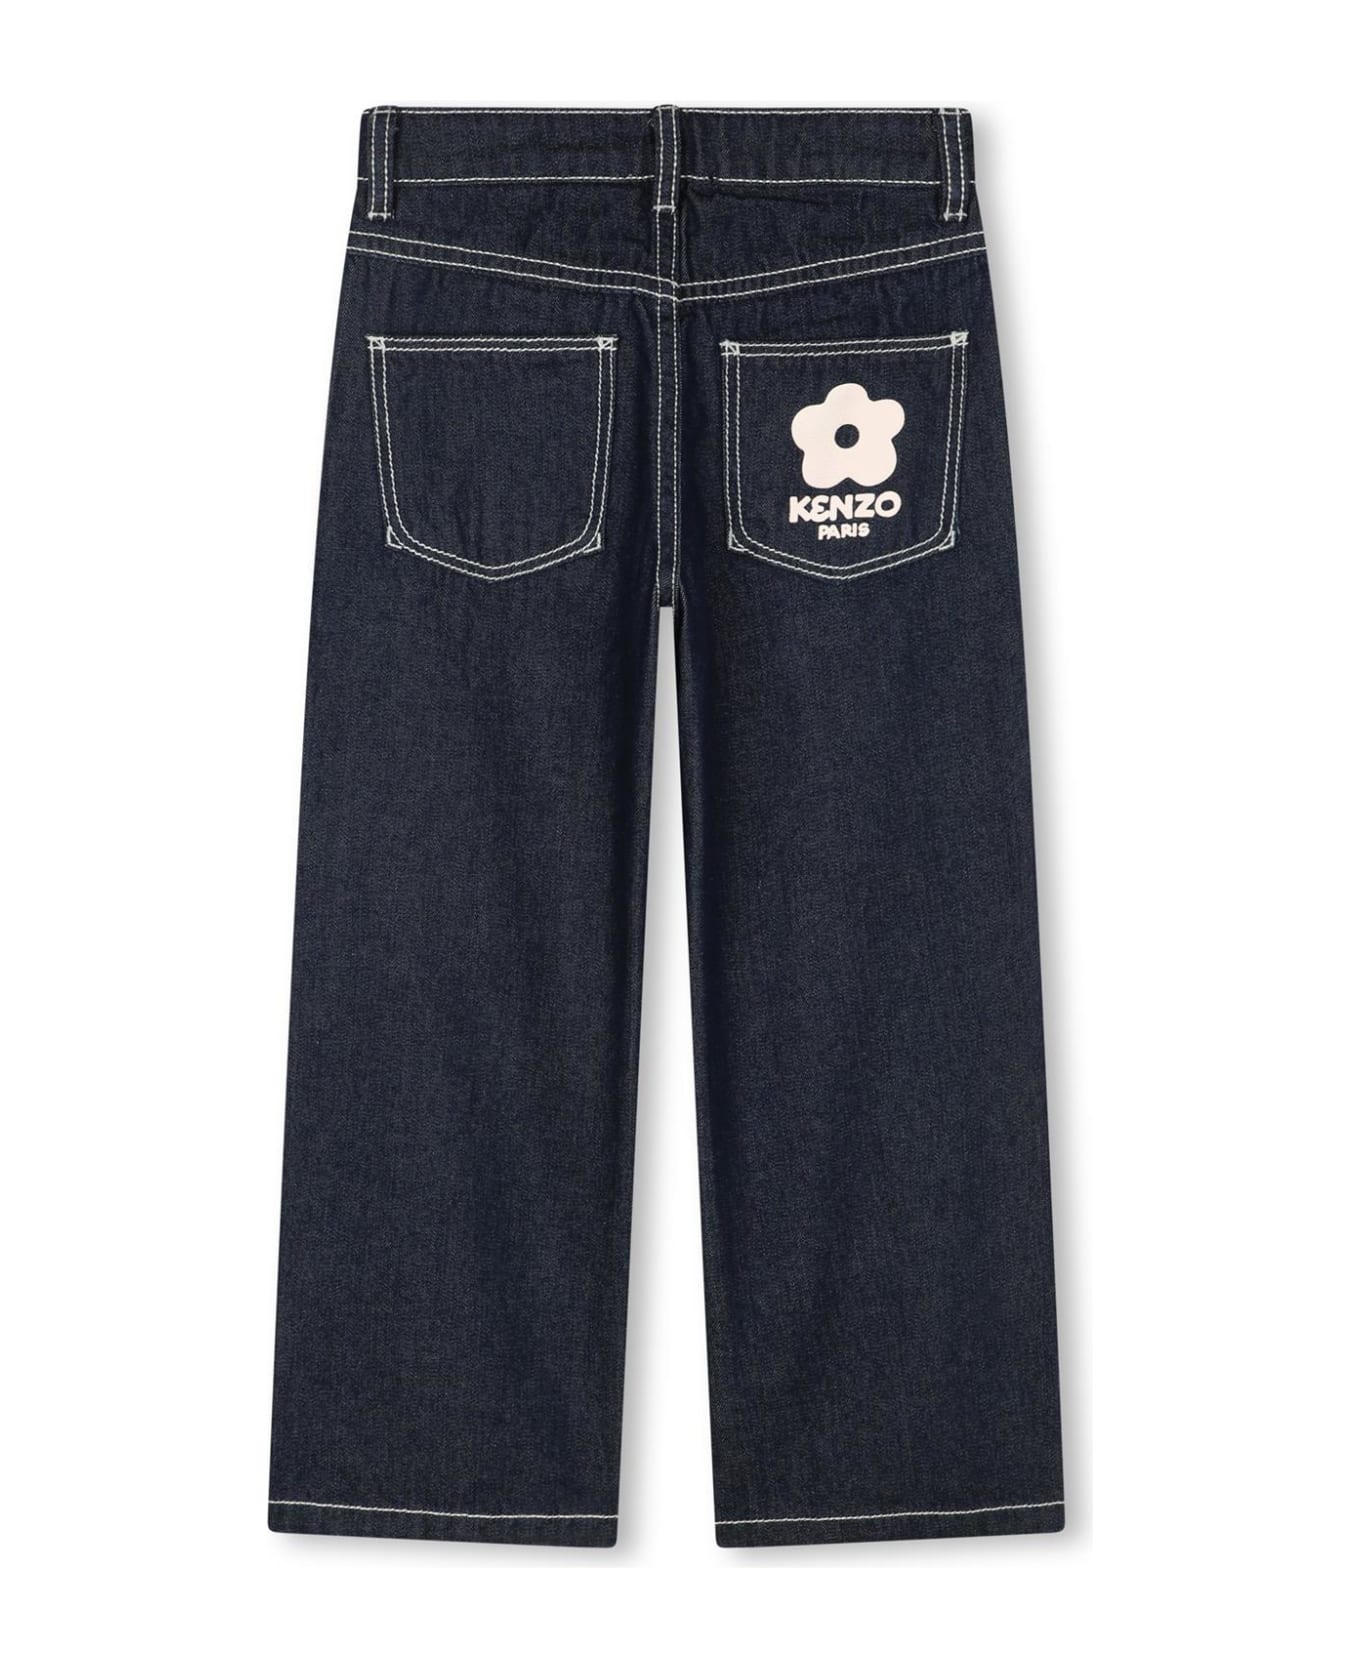 Kenzo Kids Jeans Dritti Con Stampa - Blue ボトムス